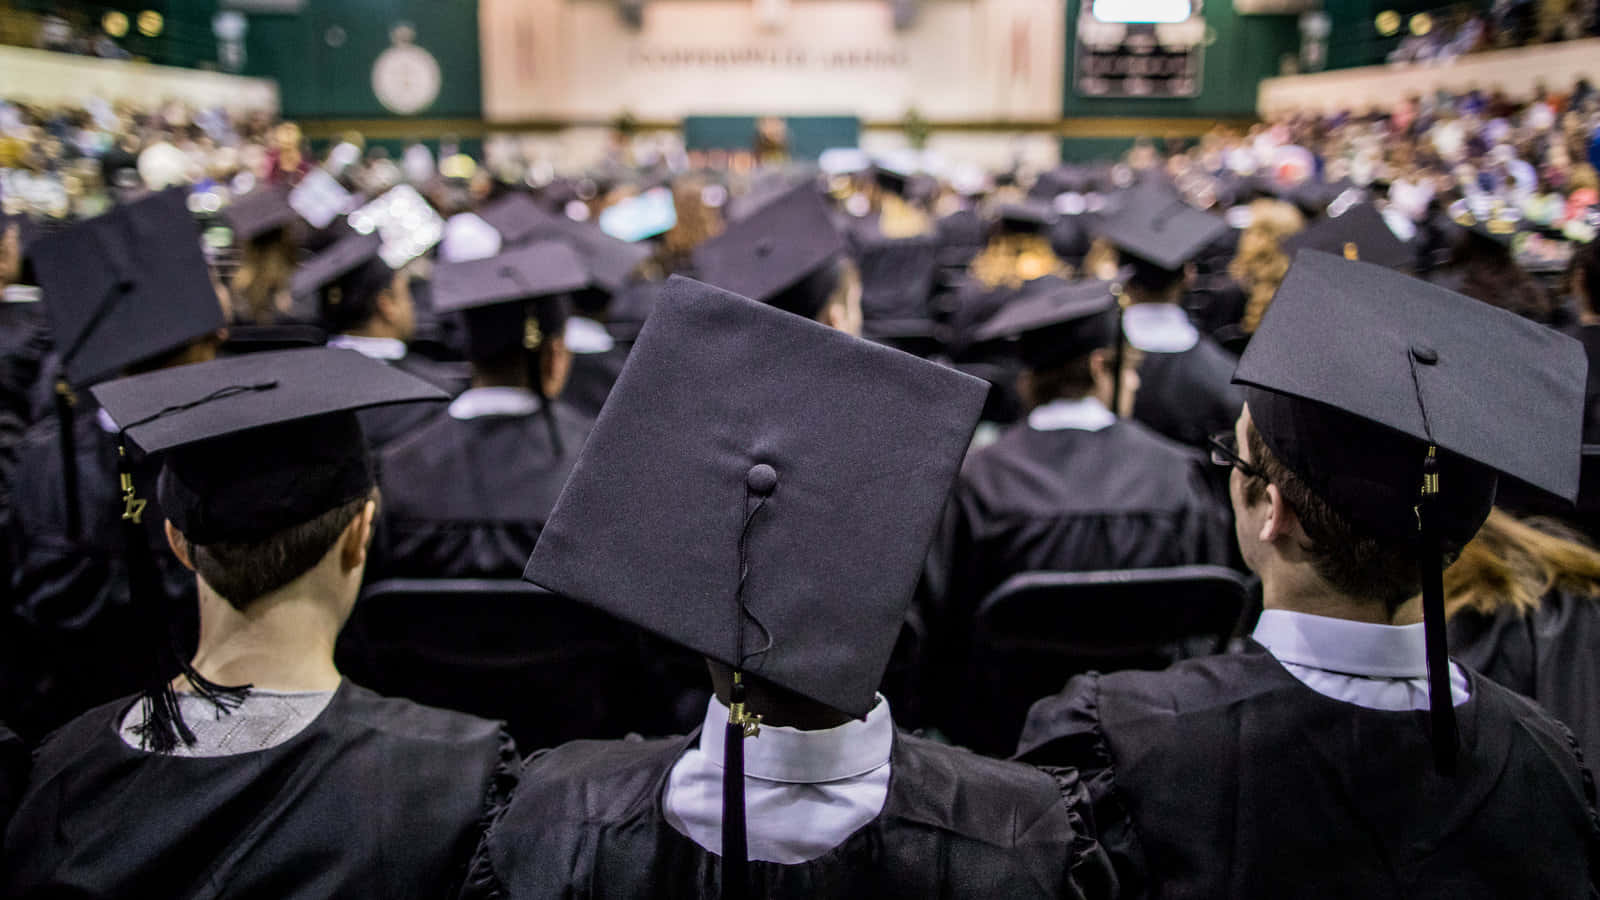 Graduates In Black Hats Are Sitting In A Large Auditorium